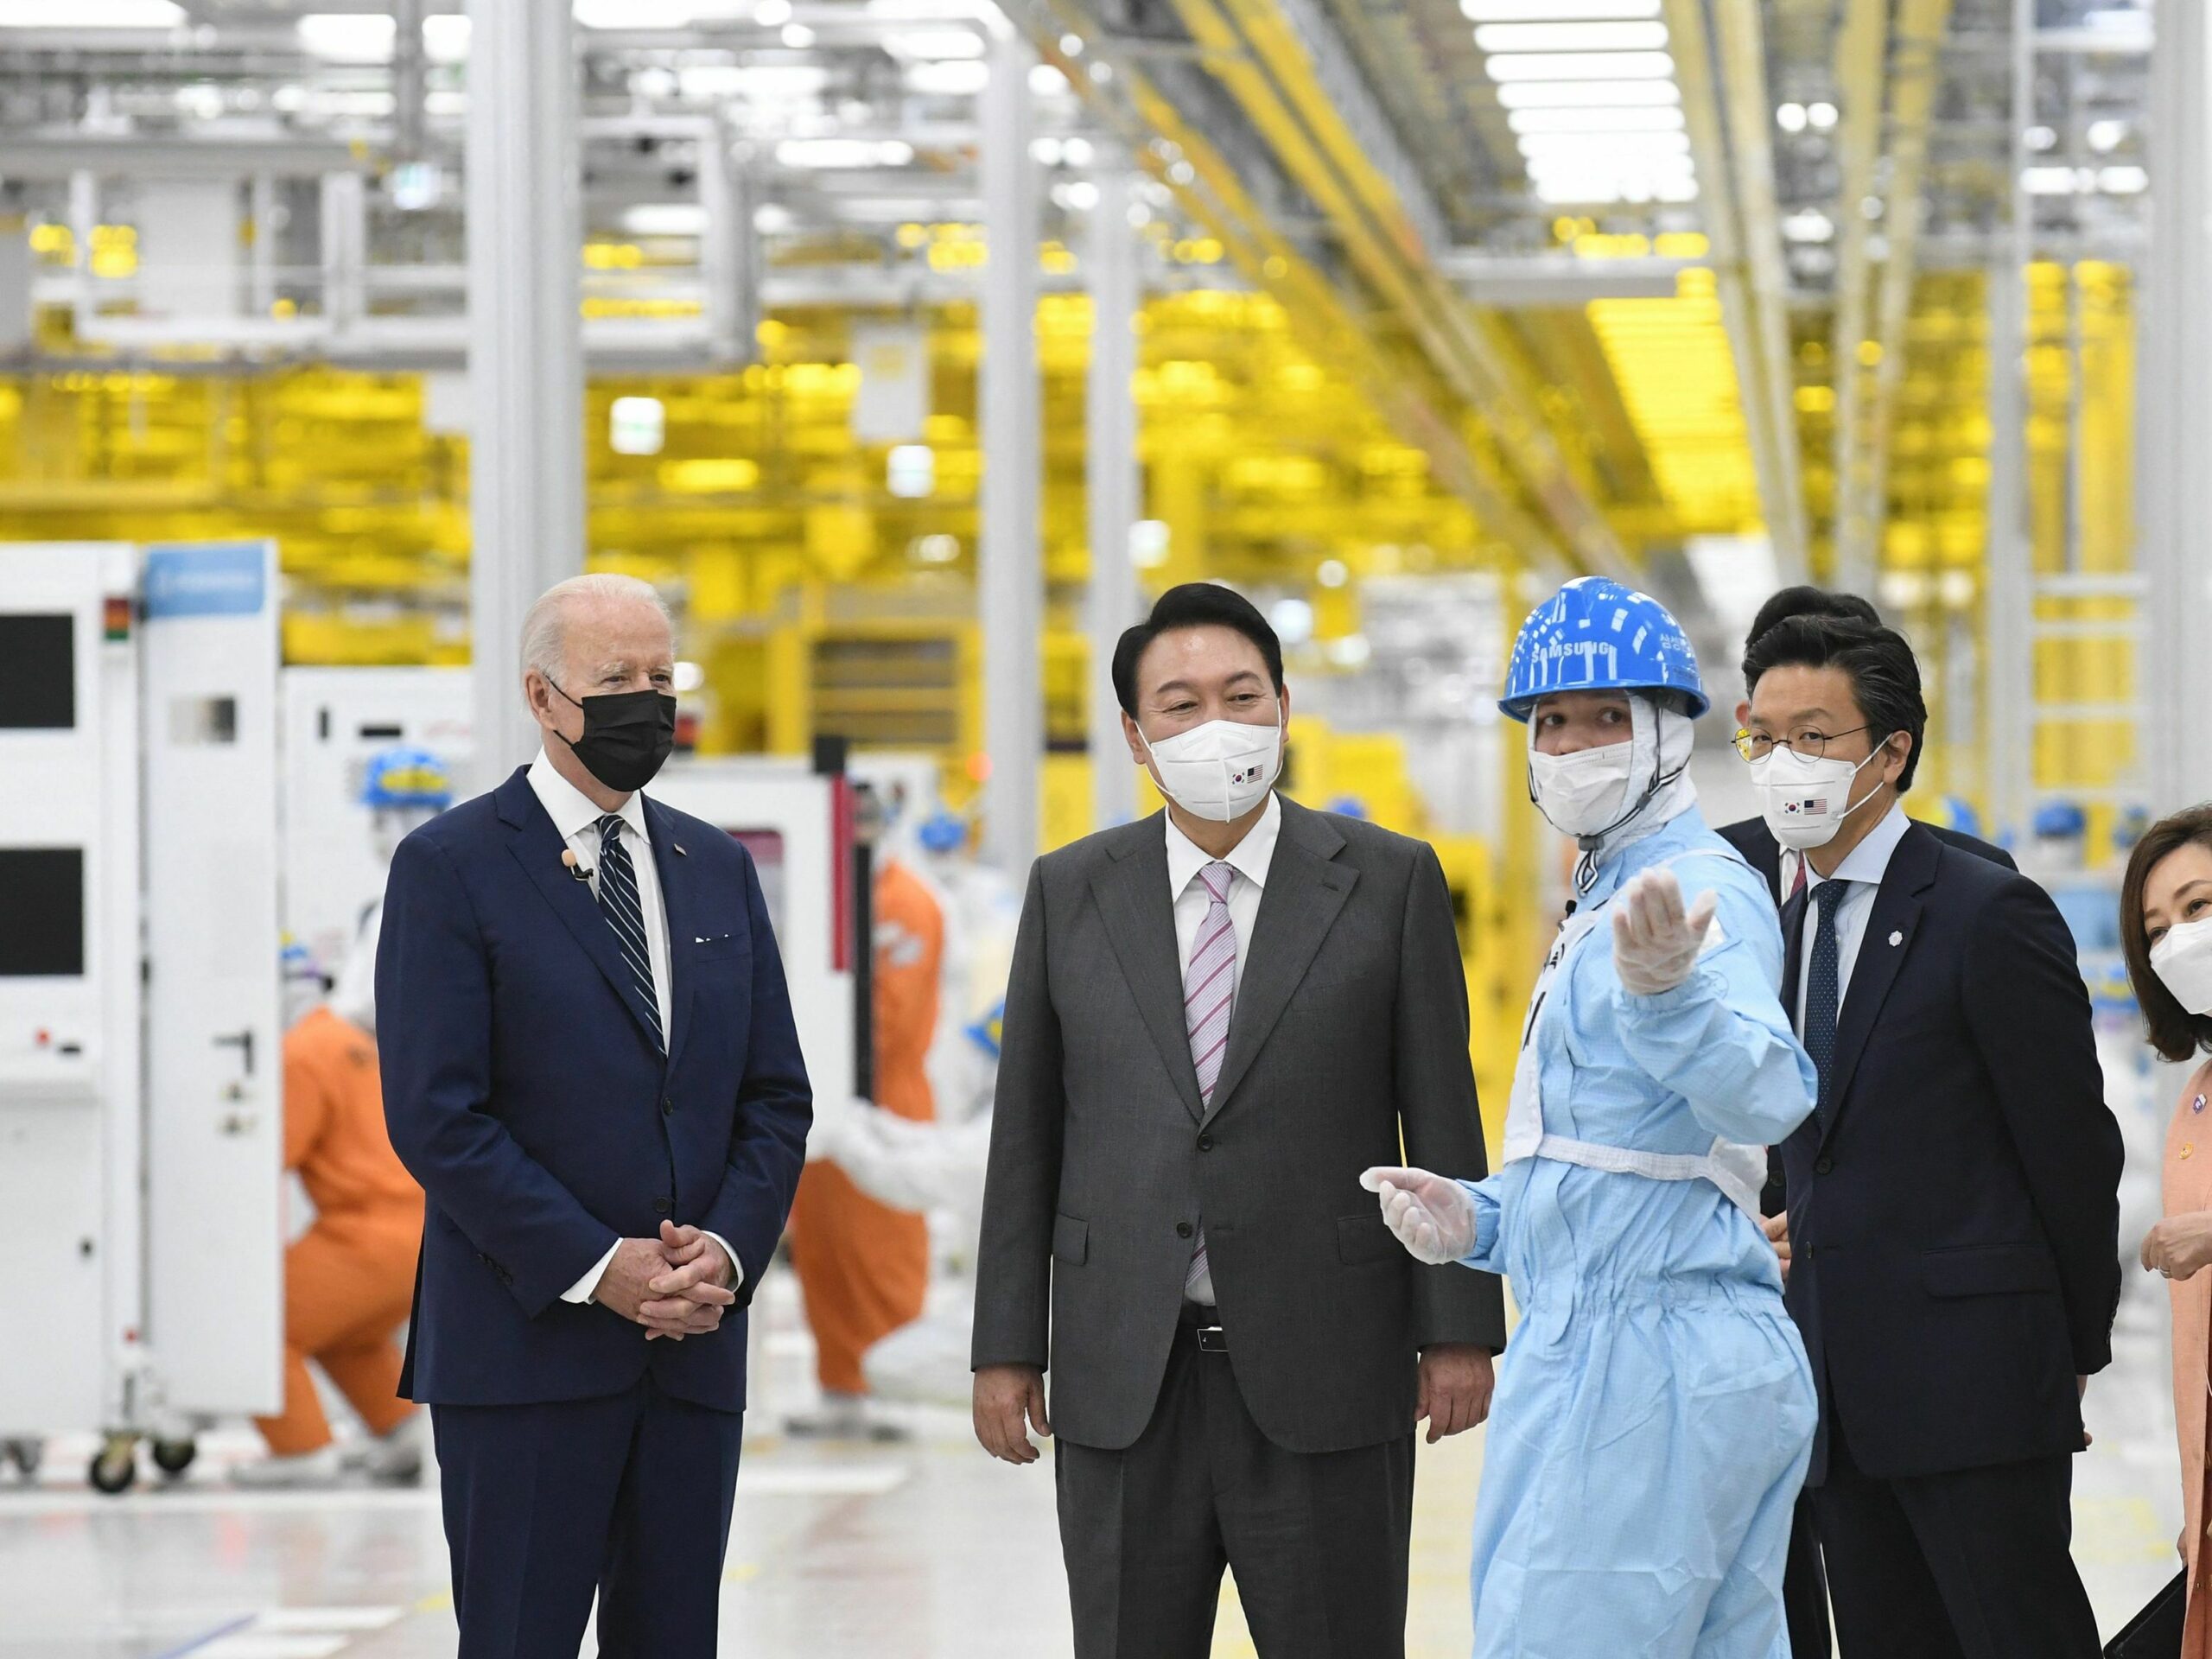 President Biden tours a Samsung plant in Pyeongtaek, South Korea with South Korean President Yoon Suk-youl on May 20, 2022. The company is building a massive new campus in Texas.